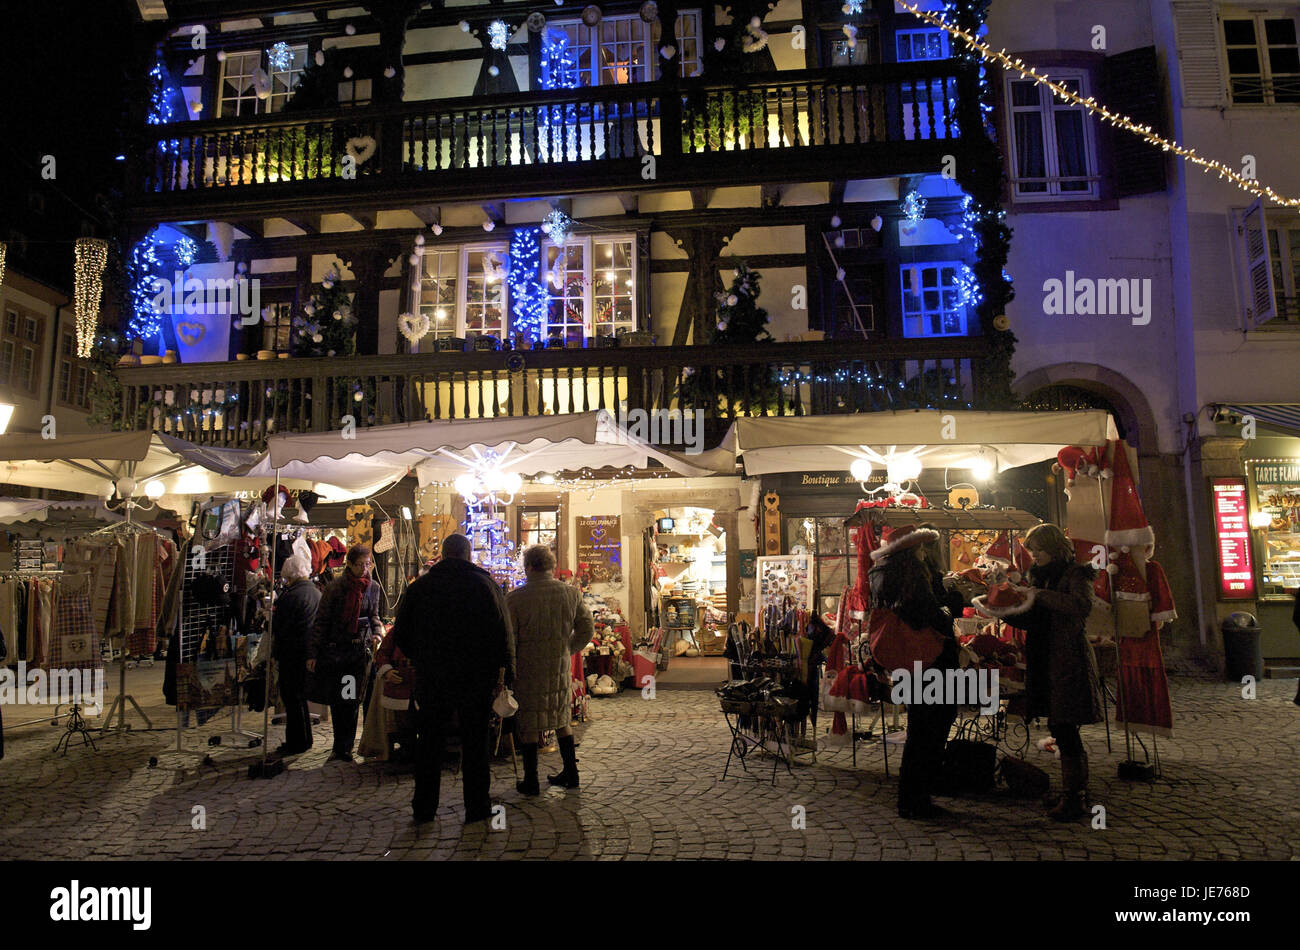 Europe, France, Alsace, Strasbourg, market stalls in the Place you Marche, Stock Photo